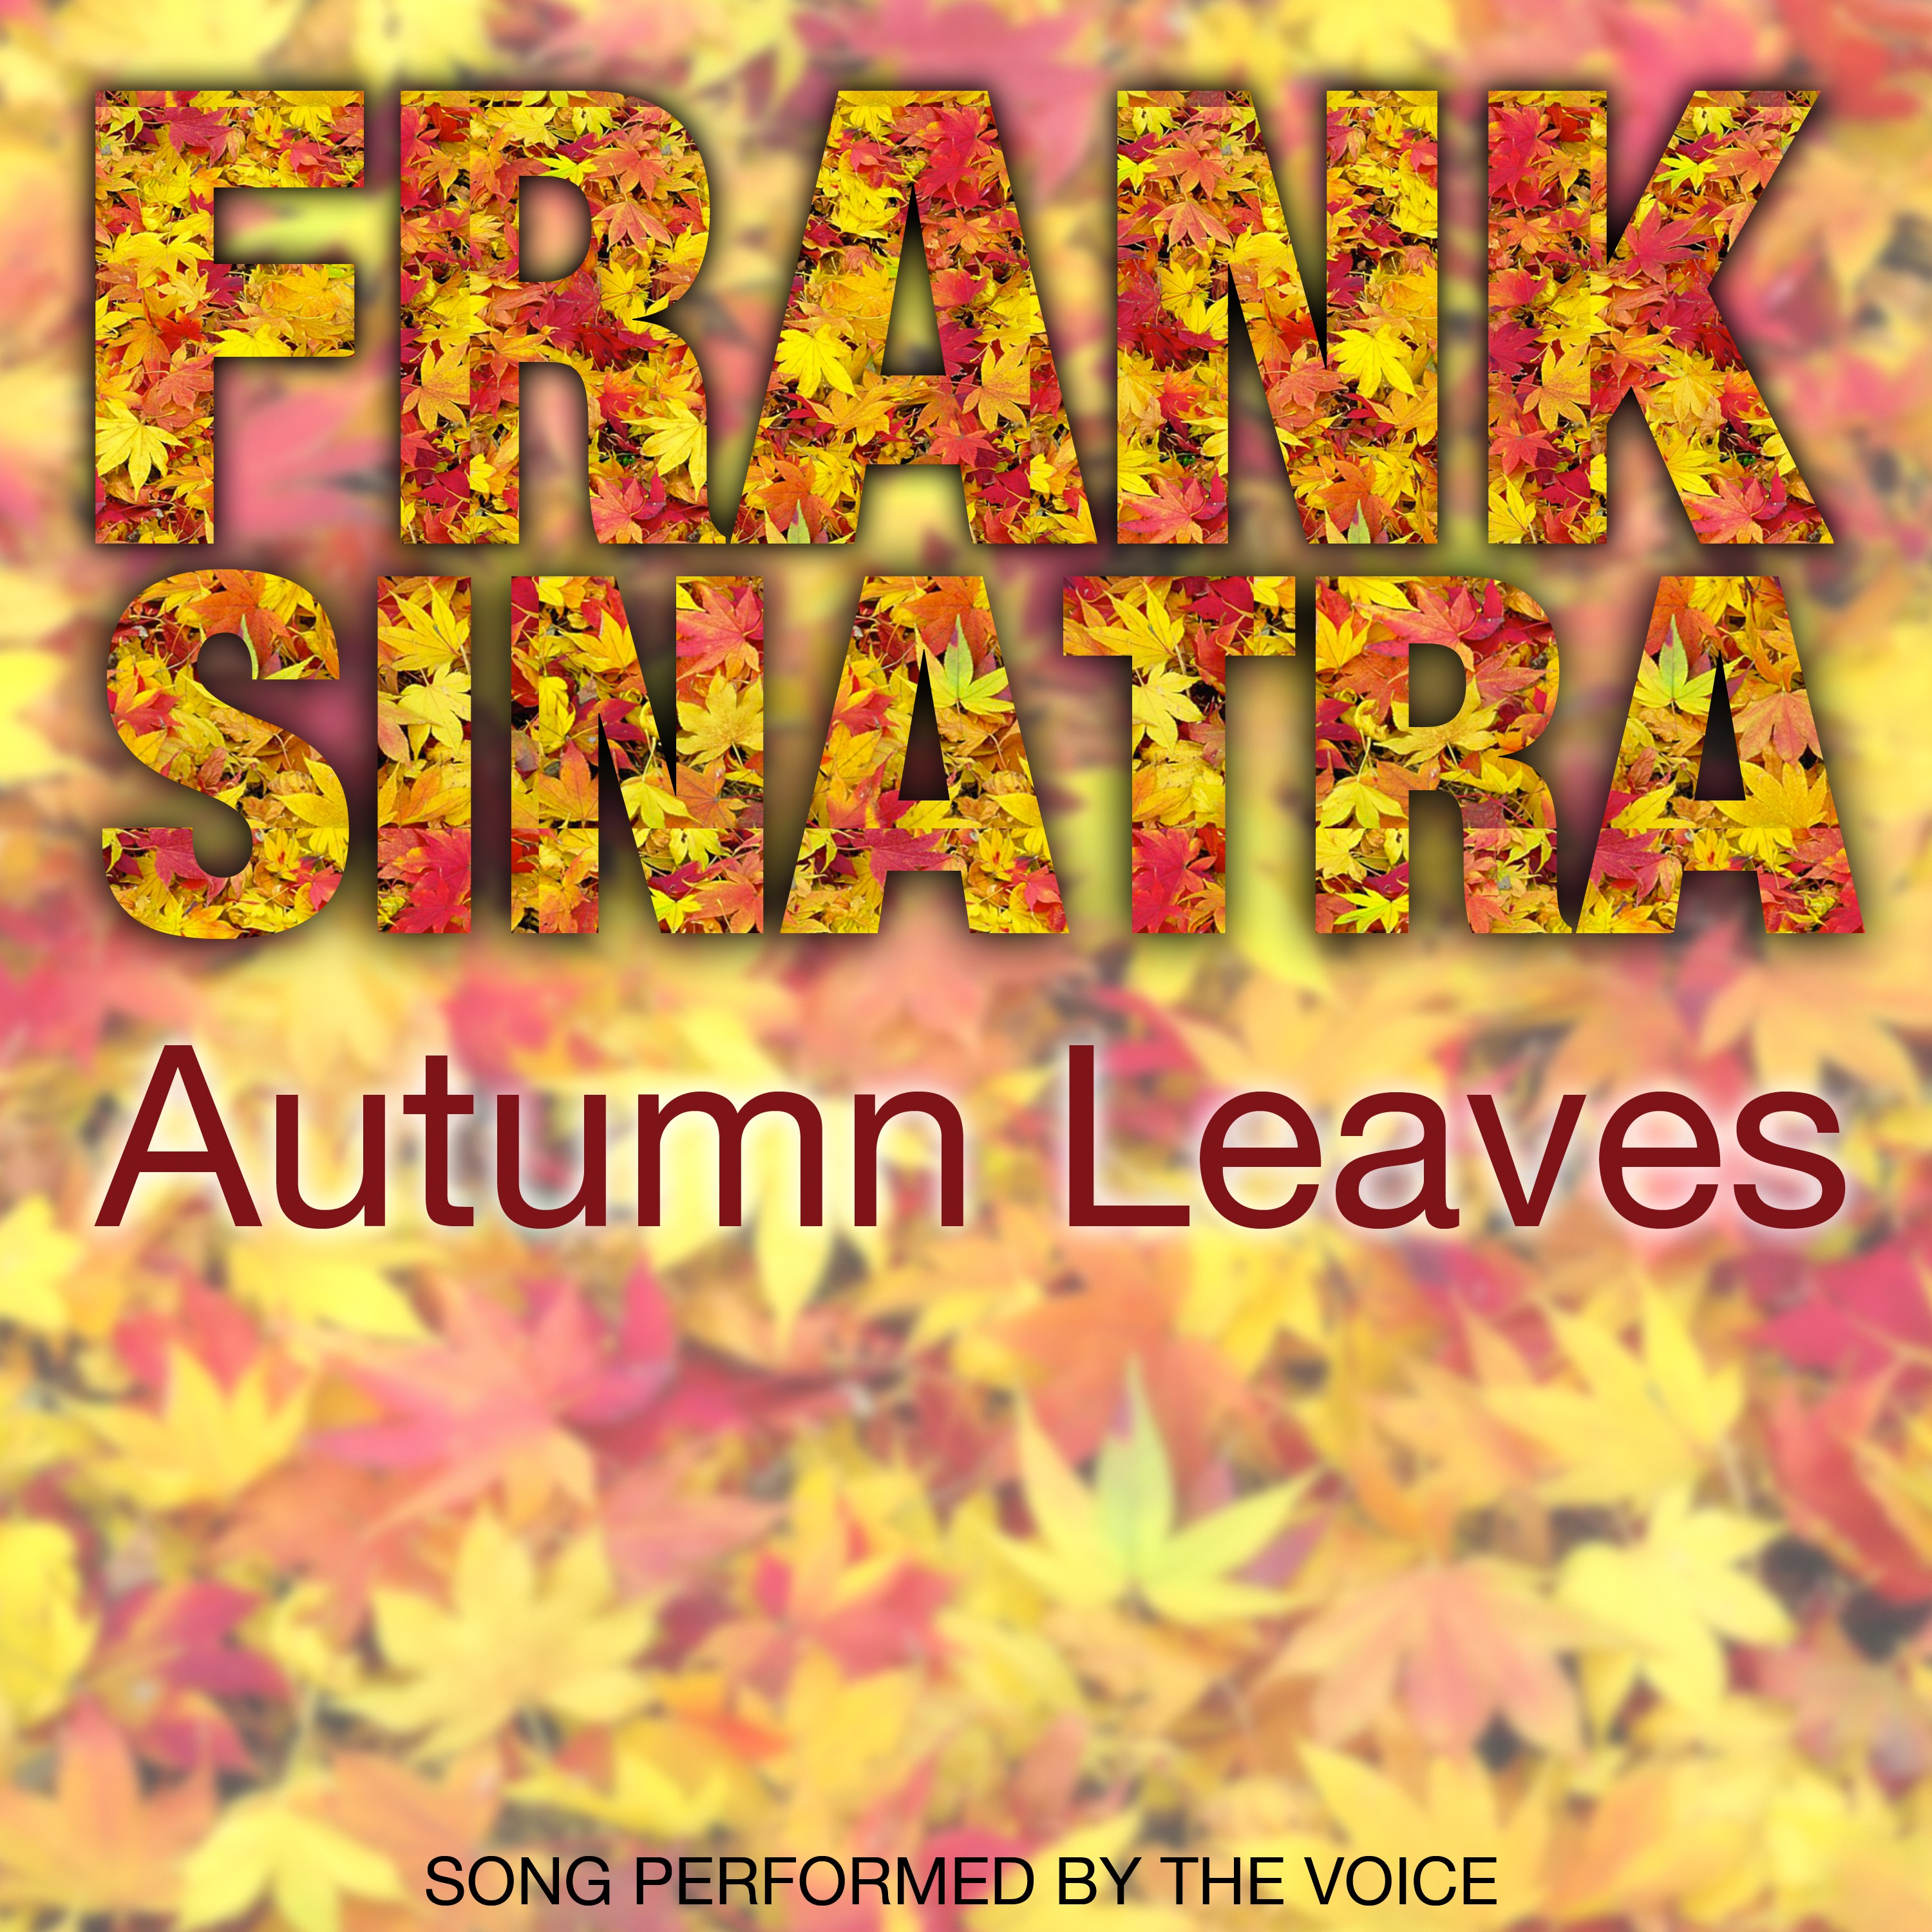 Autumn Leaves (Songs Performed by the Voice)